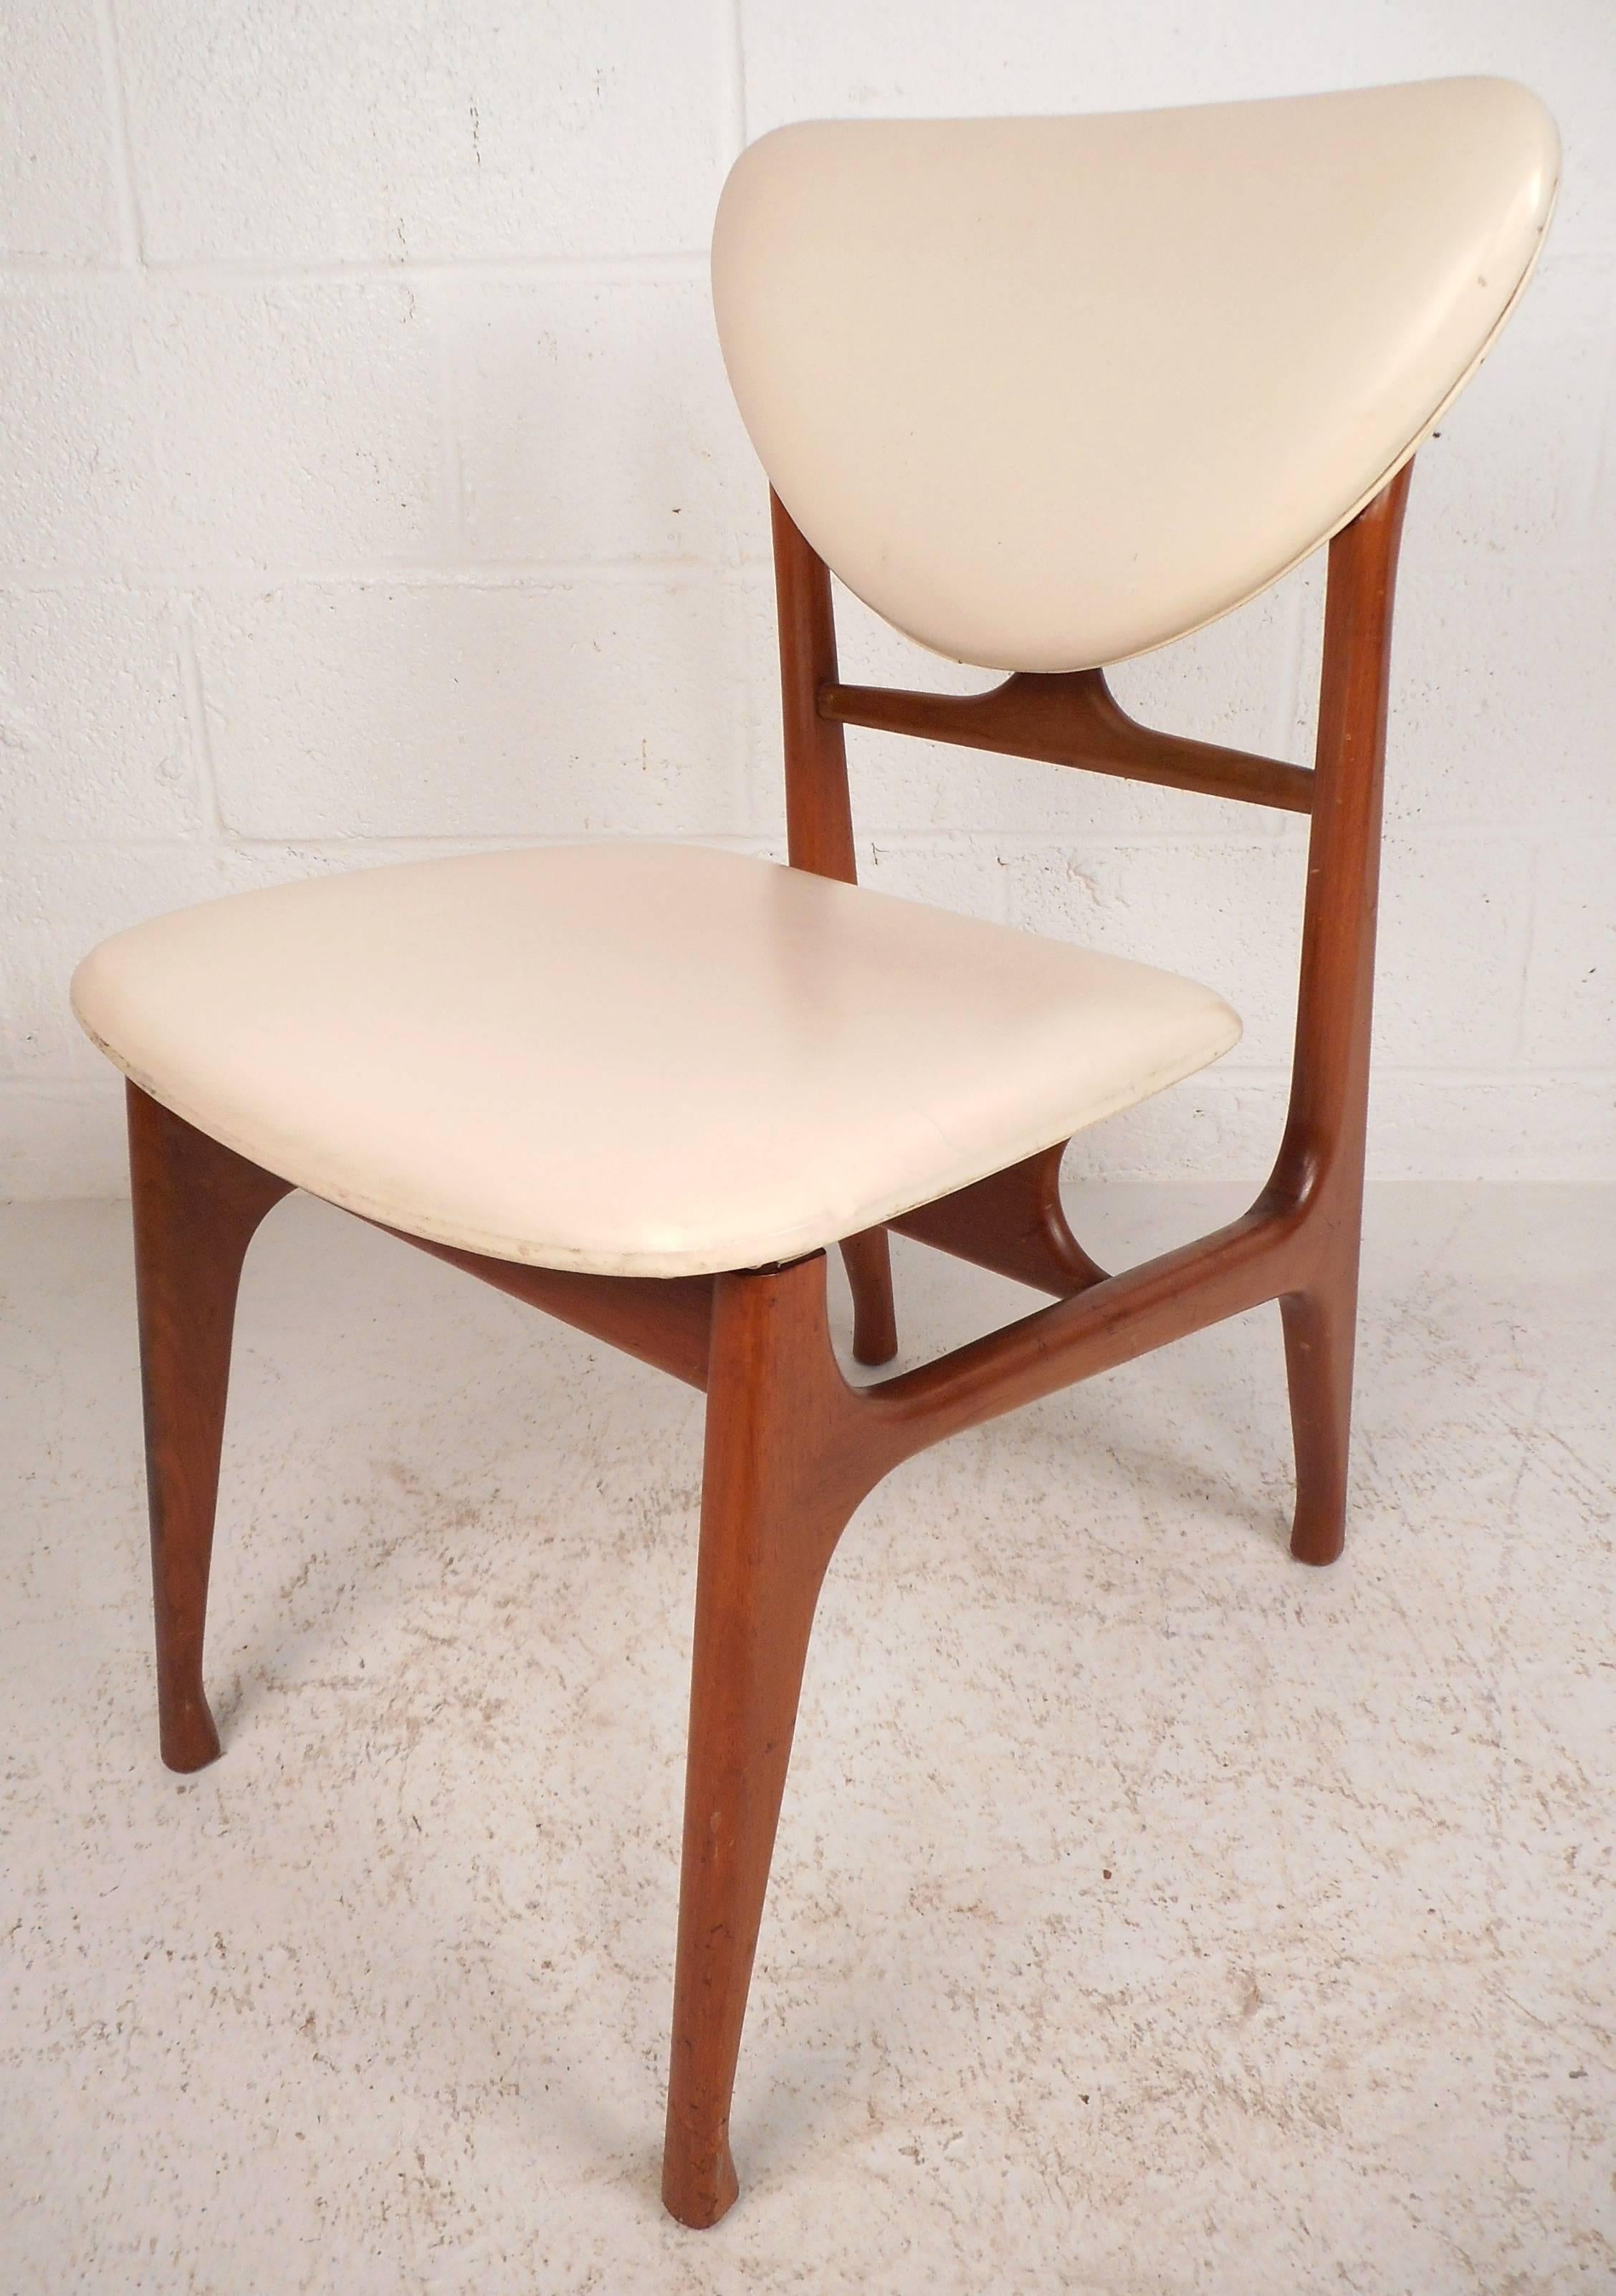 Stunning set of four Mid-Century Modern dining chairs feature a vintage teak finish and a unique sculpted frame. The stylish floating seat and shapely backrest provide optimal comfort. The beautiful white vinyl upholstery is sure to add style to any